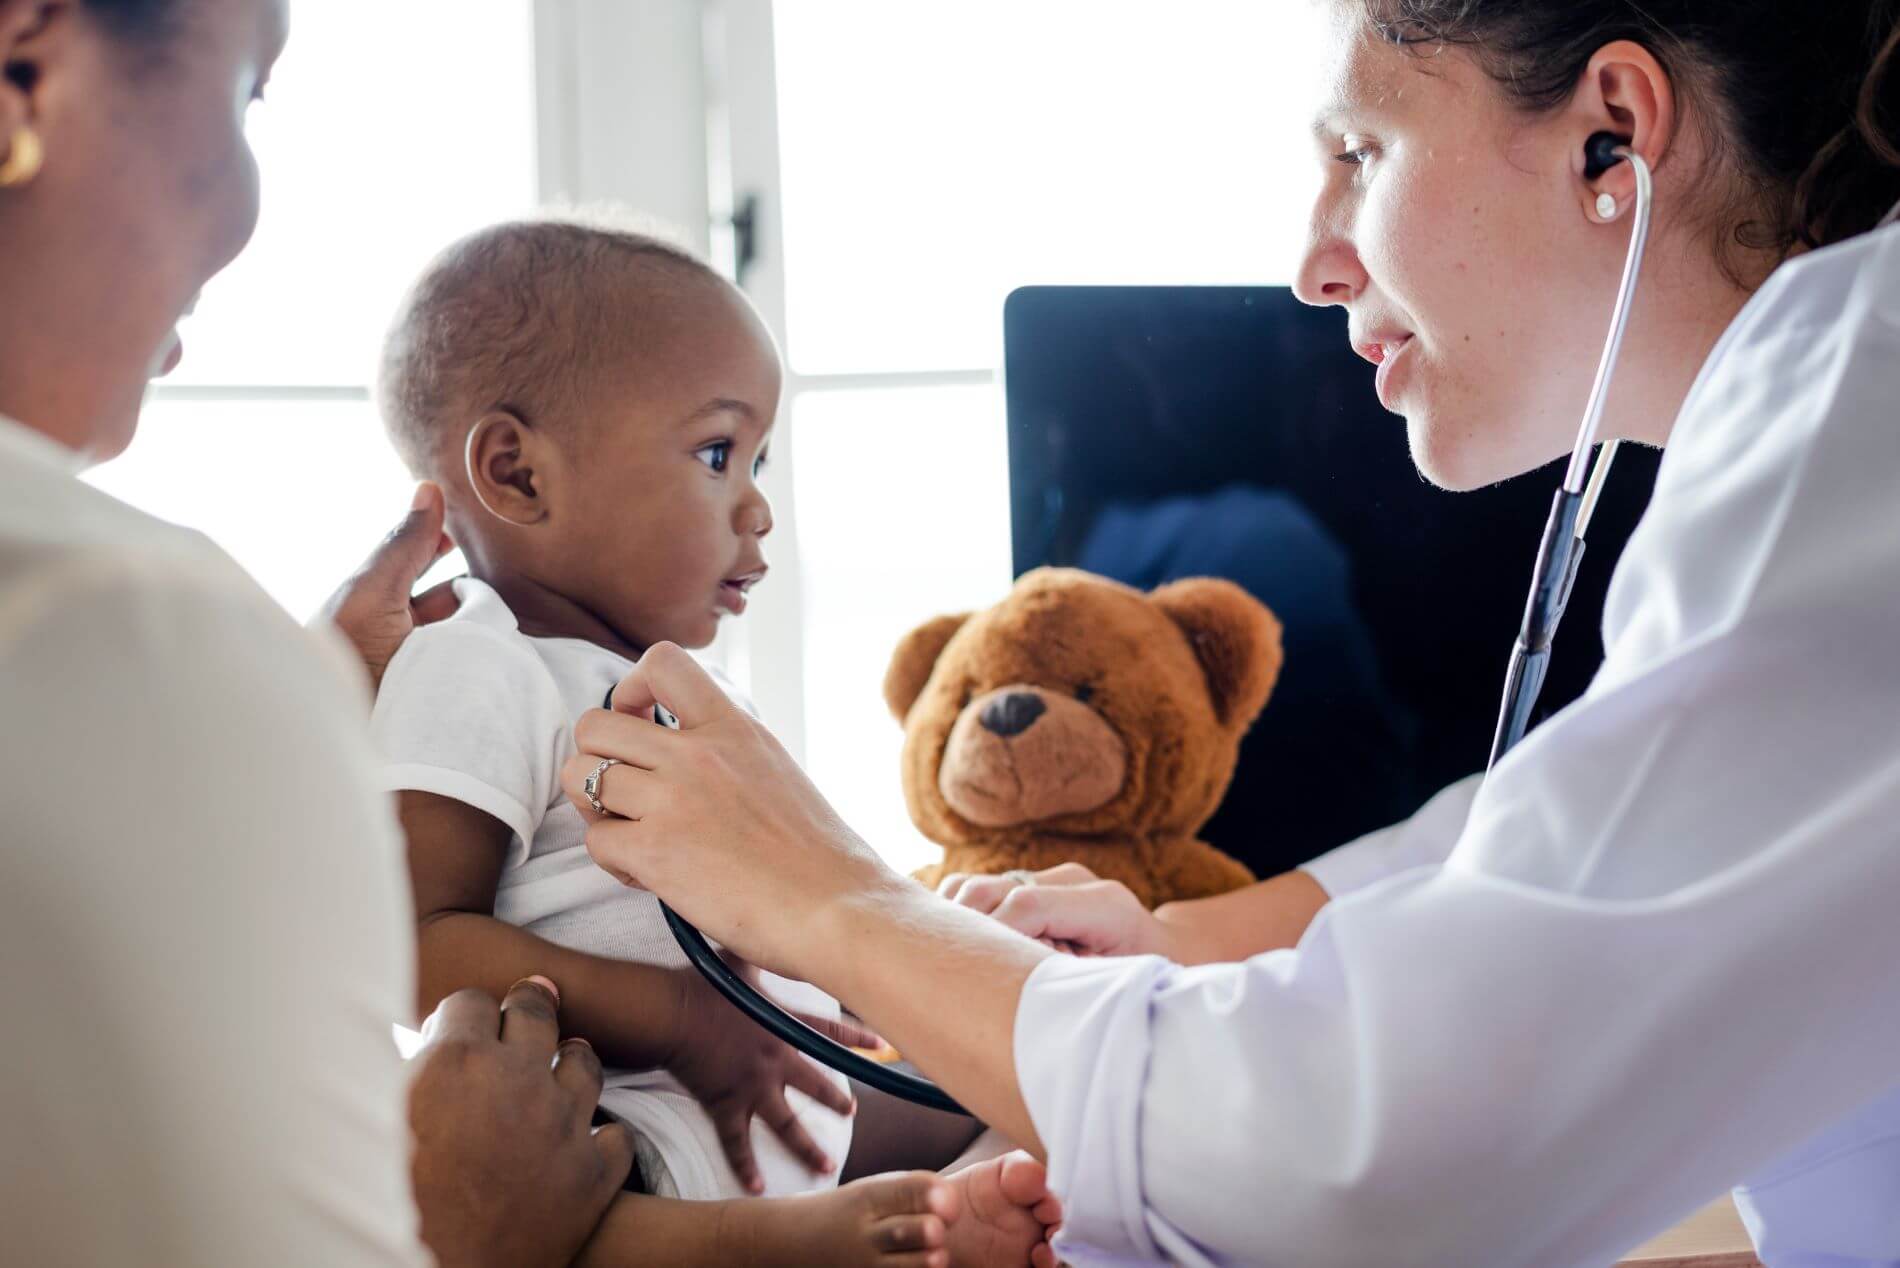 Doctor with stethoscope observing baby with mother nearby.